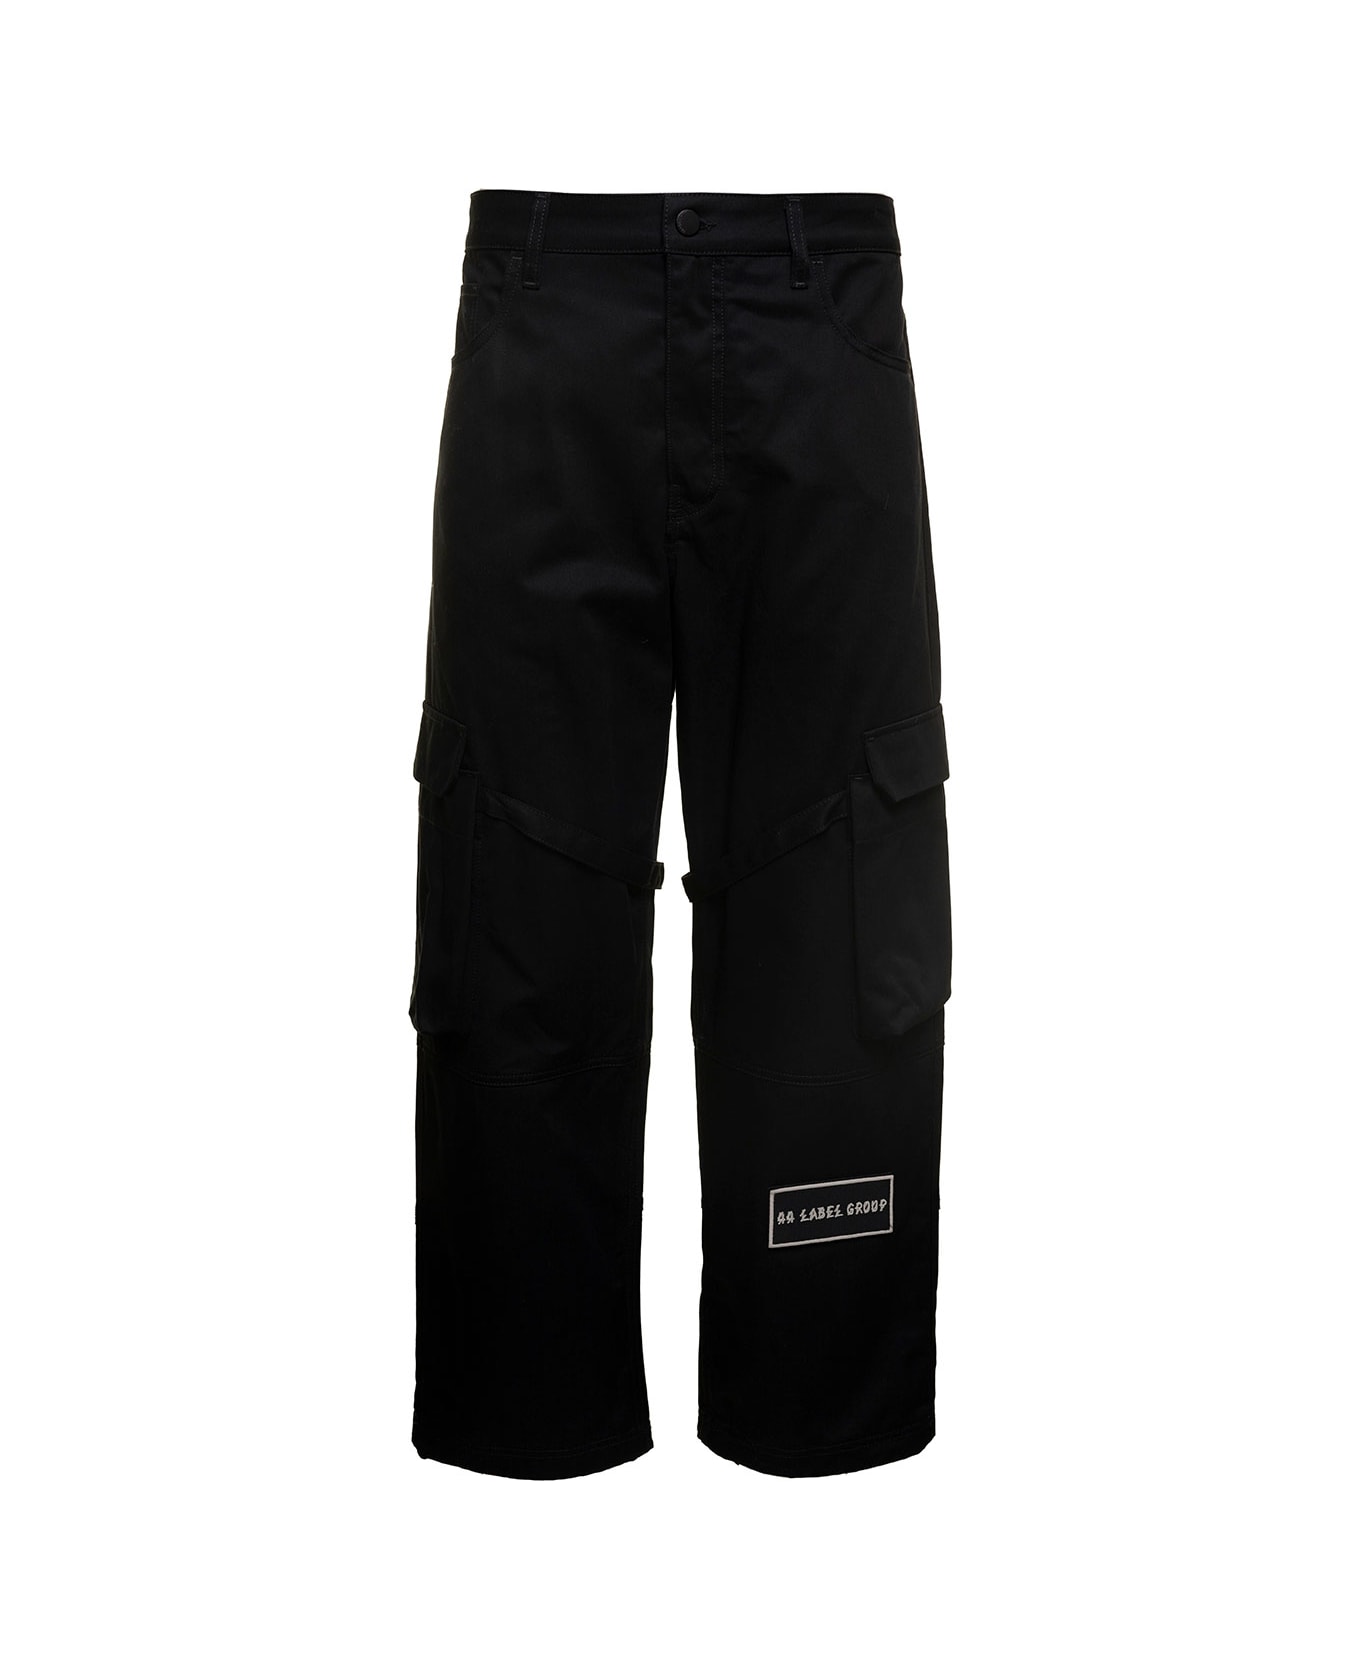 44 Label Group 'helm' Black Cargo Pants With Logo Patch In Cotton Man - Black